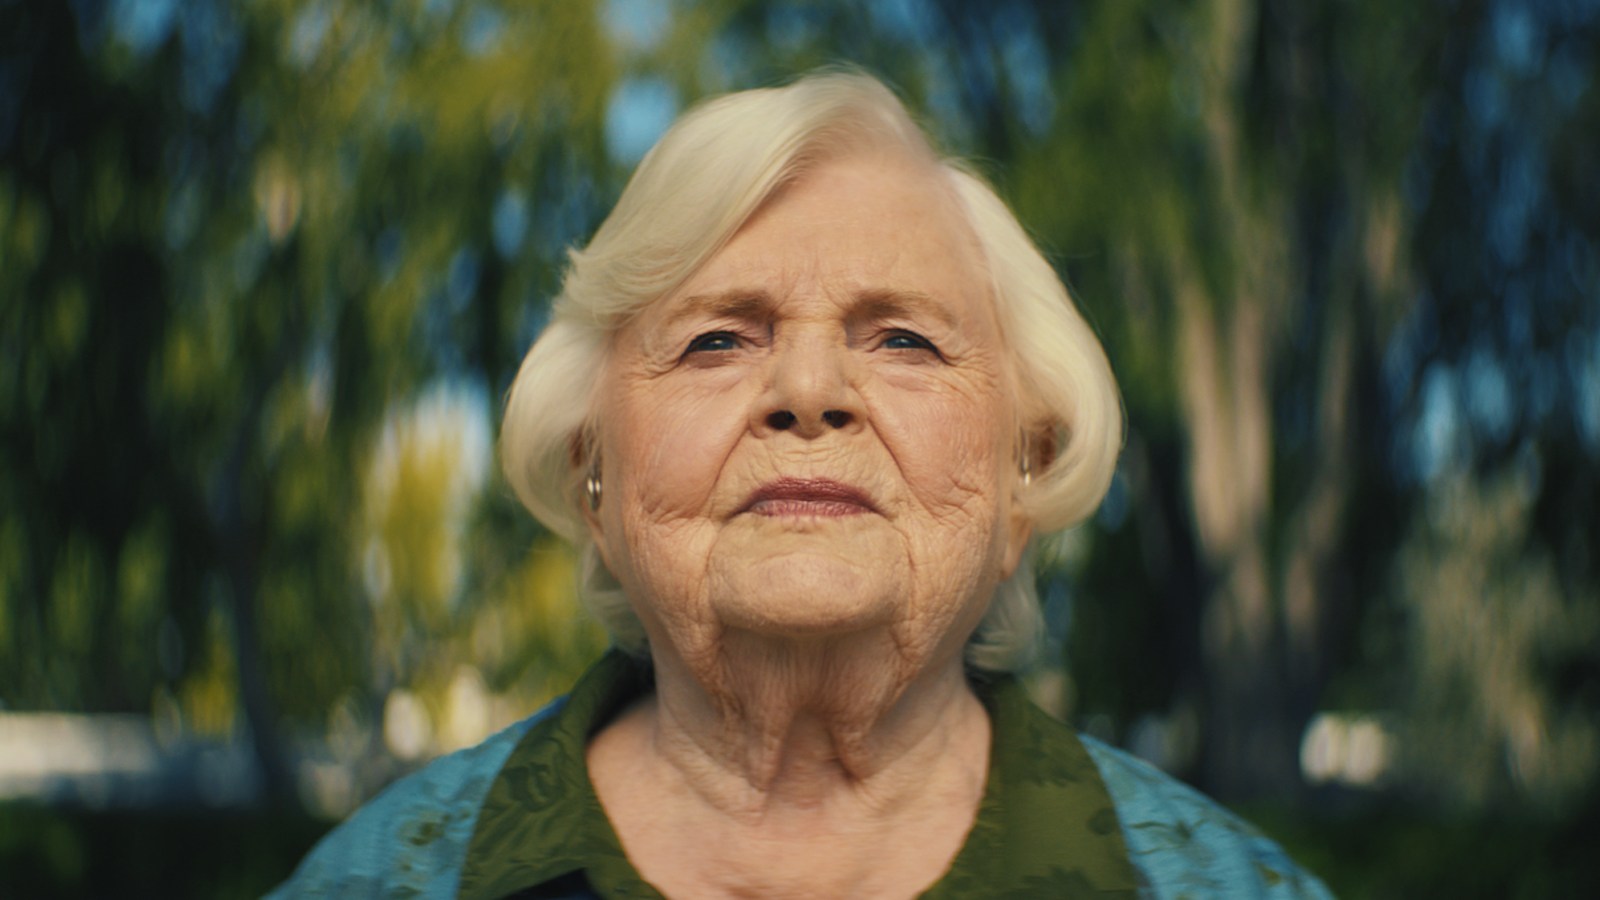 ‘Don’t Tell Me I Can’t Do Something’: June Squibb on Kicking Ass in ‘Thelma’